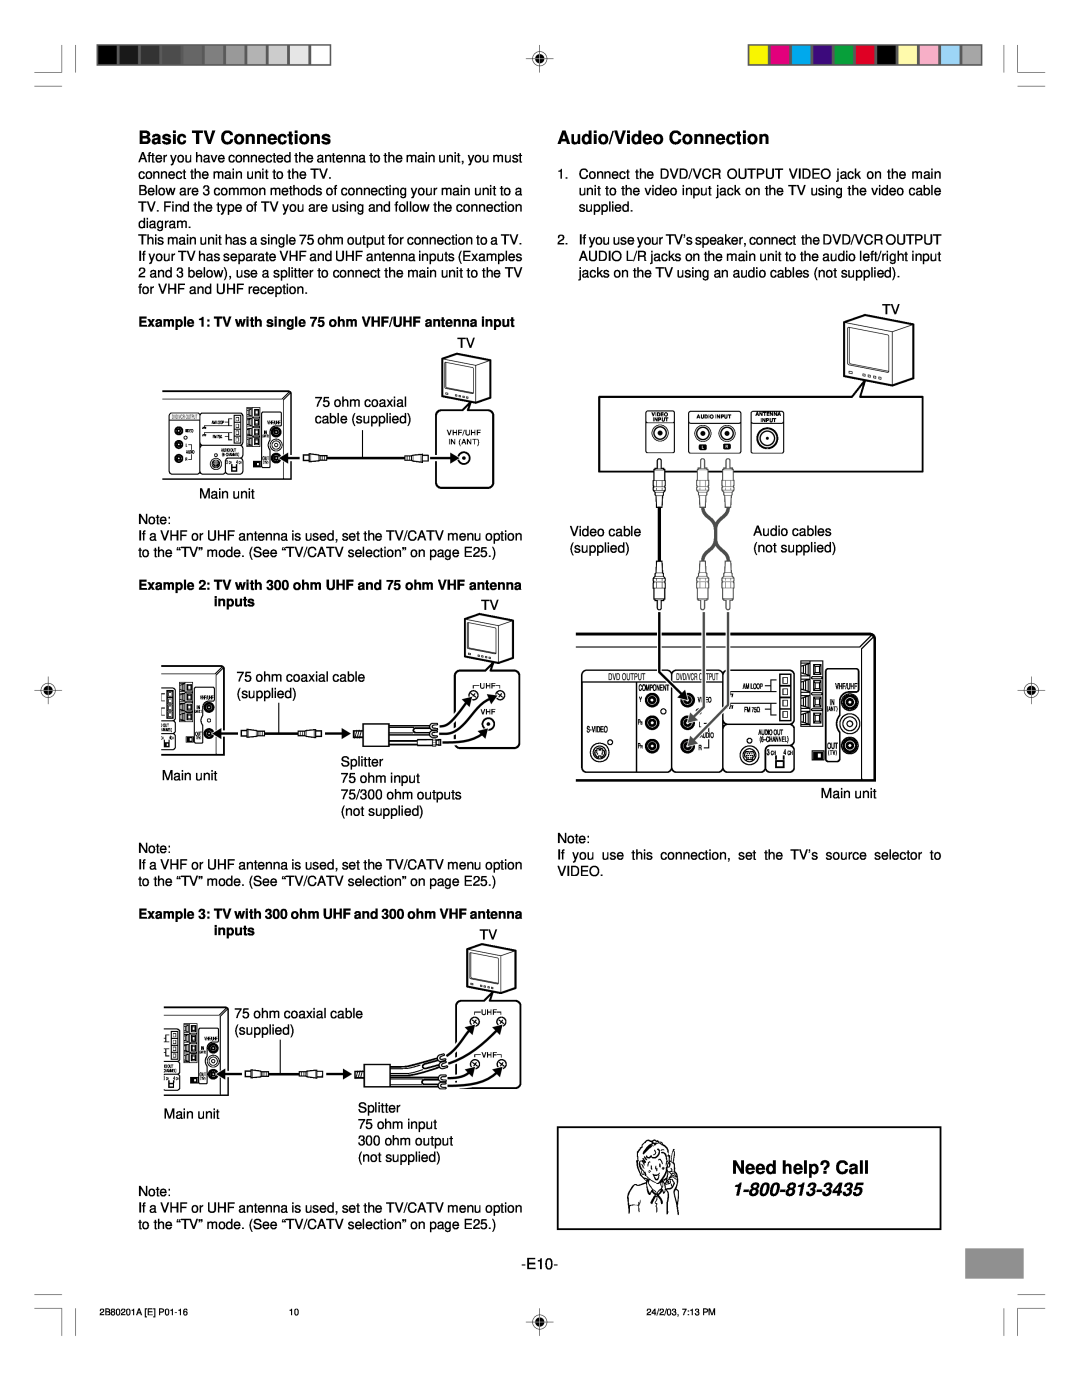 Sanyo DWM-3500 instruction manual Basic TV Connections, Audio/Video Connection, Need help? Call, inputs 